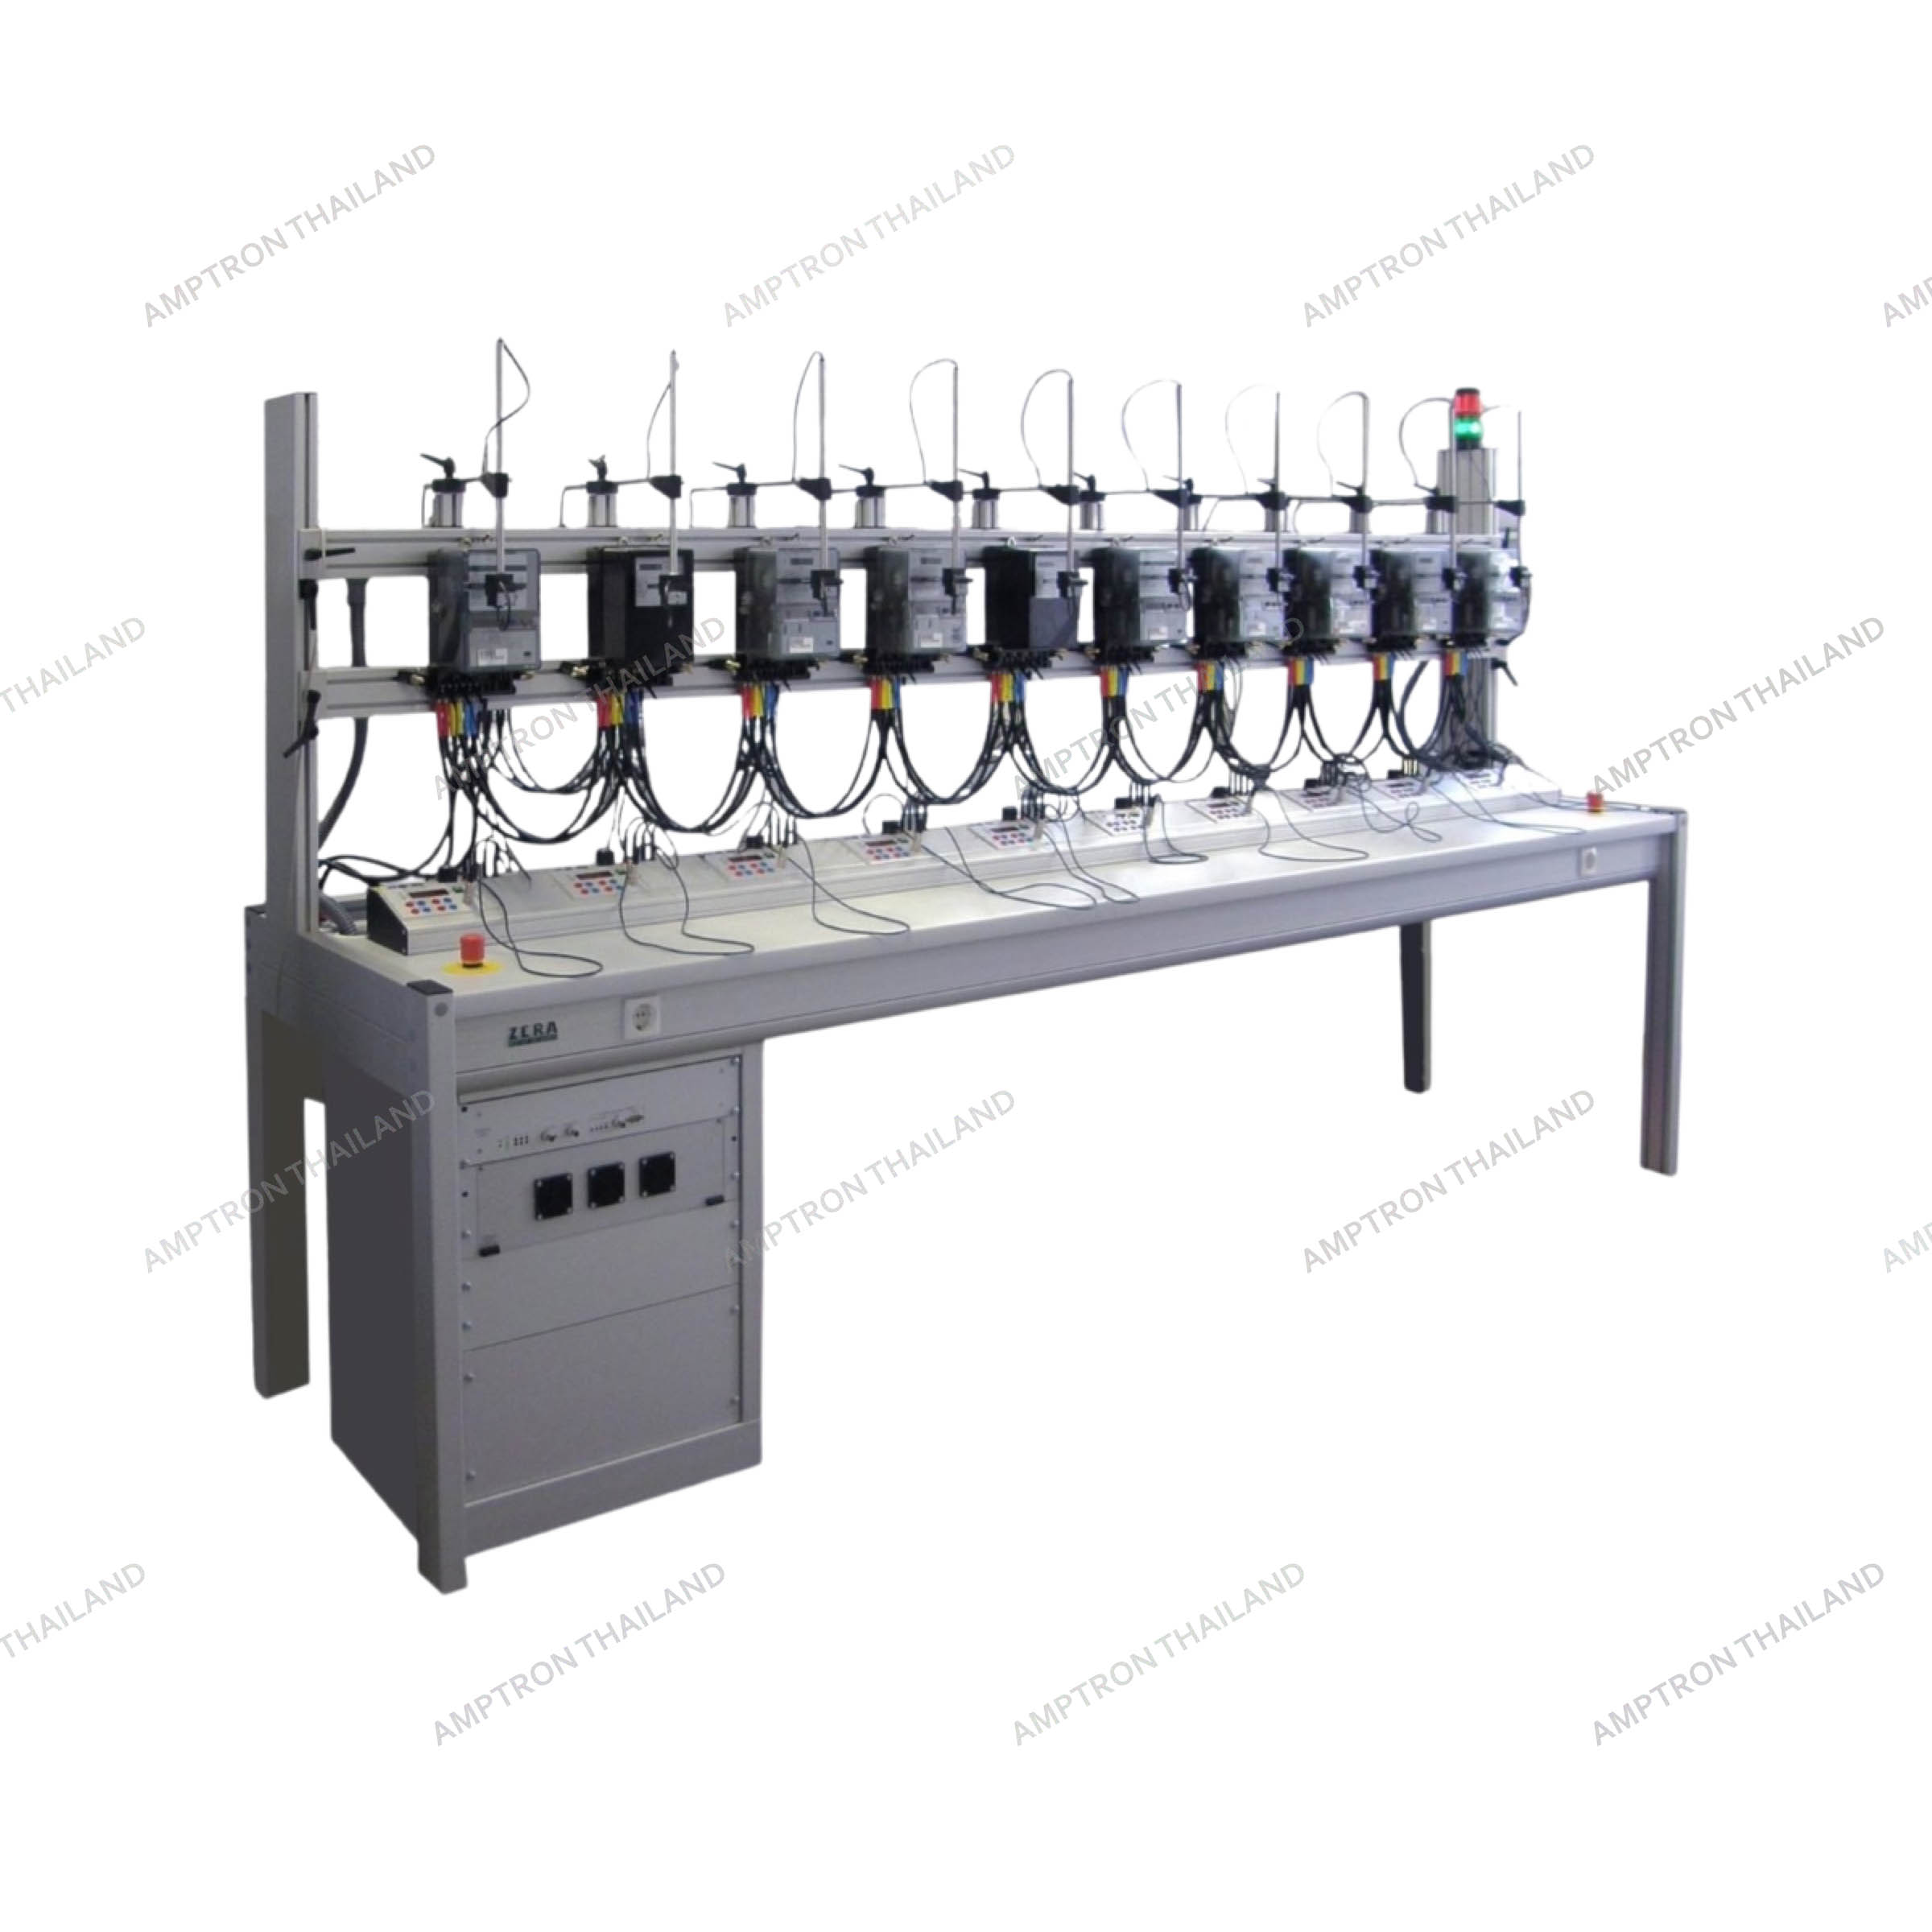 Multi-position test bench Test bench with 5, 10, 20 or 40 test positions